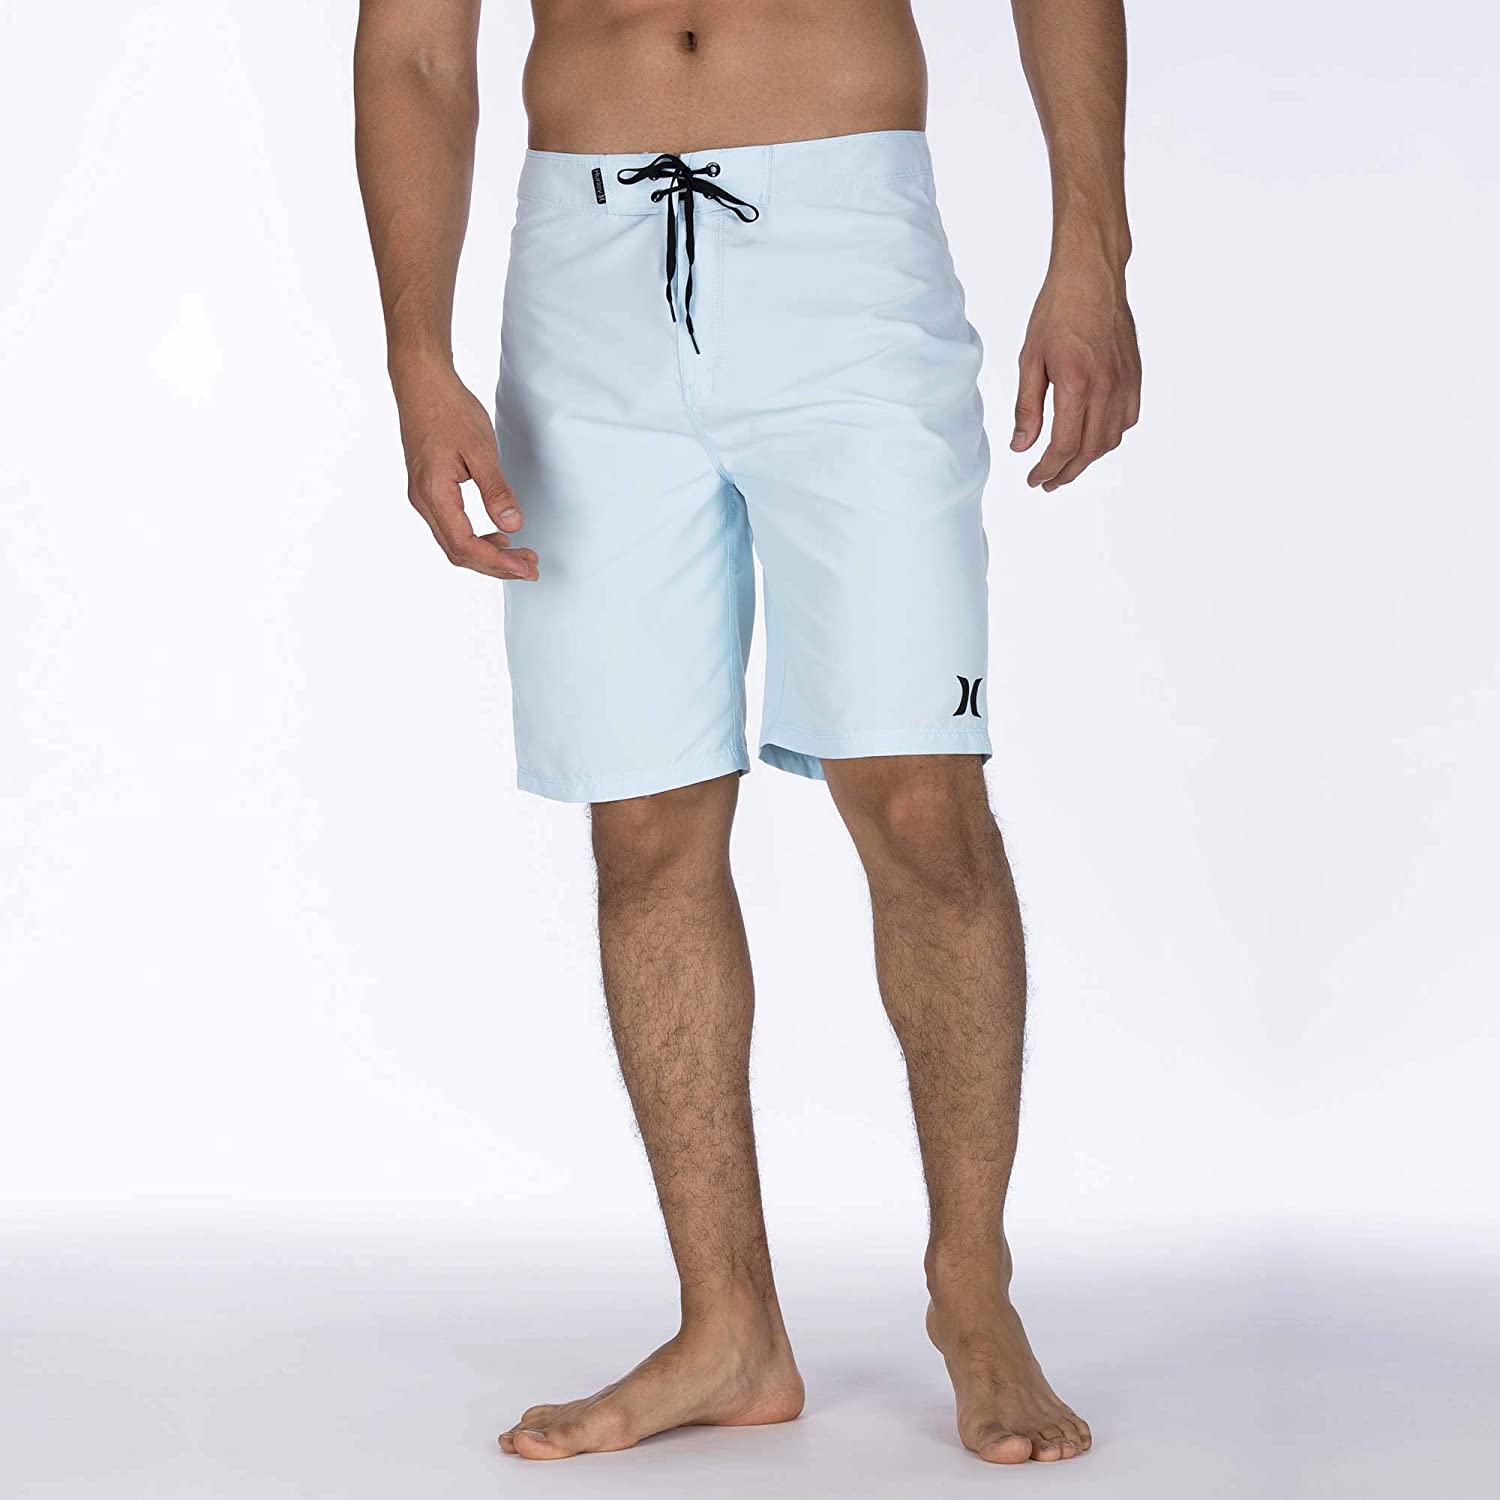 New Mens Hurley One and Only 2.0 21" Swim Surf Trunks Shorts Boardshorts 